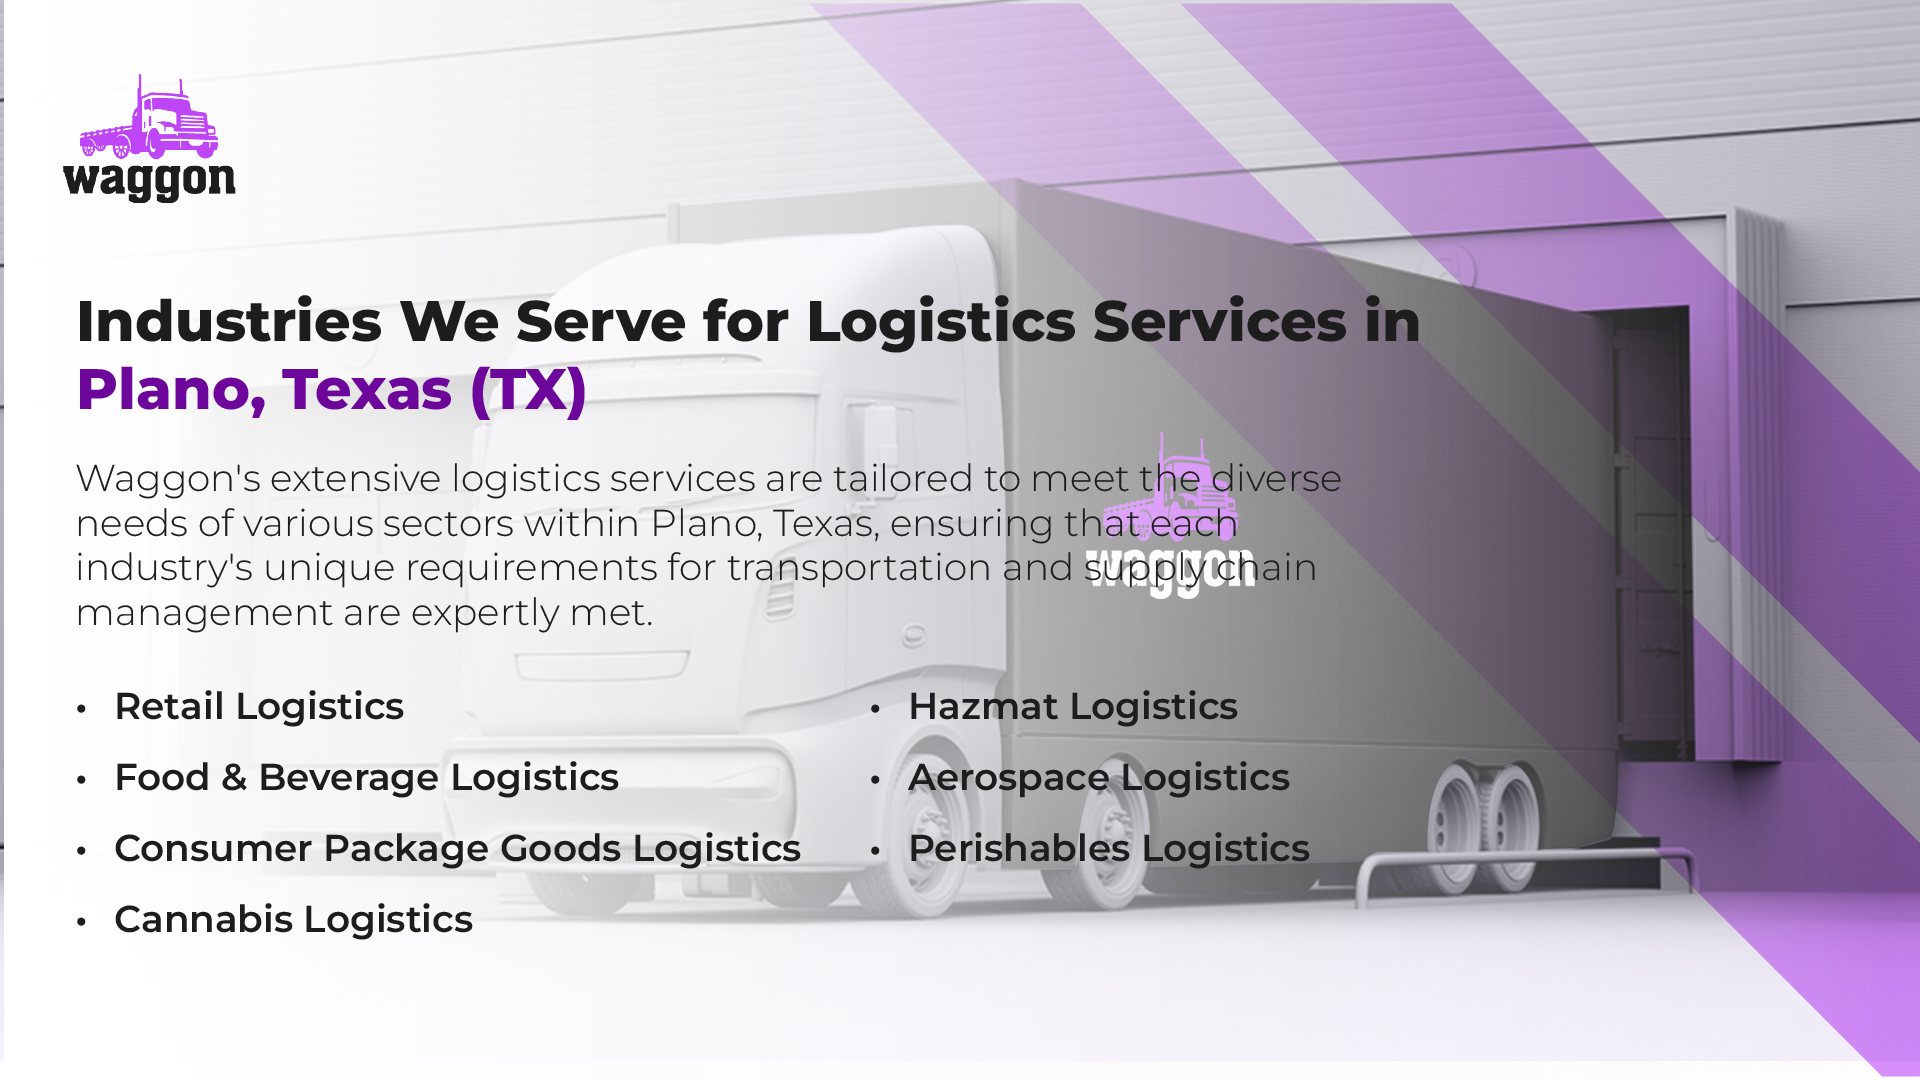 Industries We Serve for Logistics Services in Plano, Texas (TX)